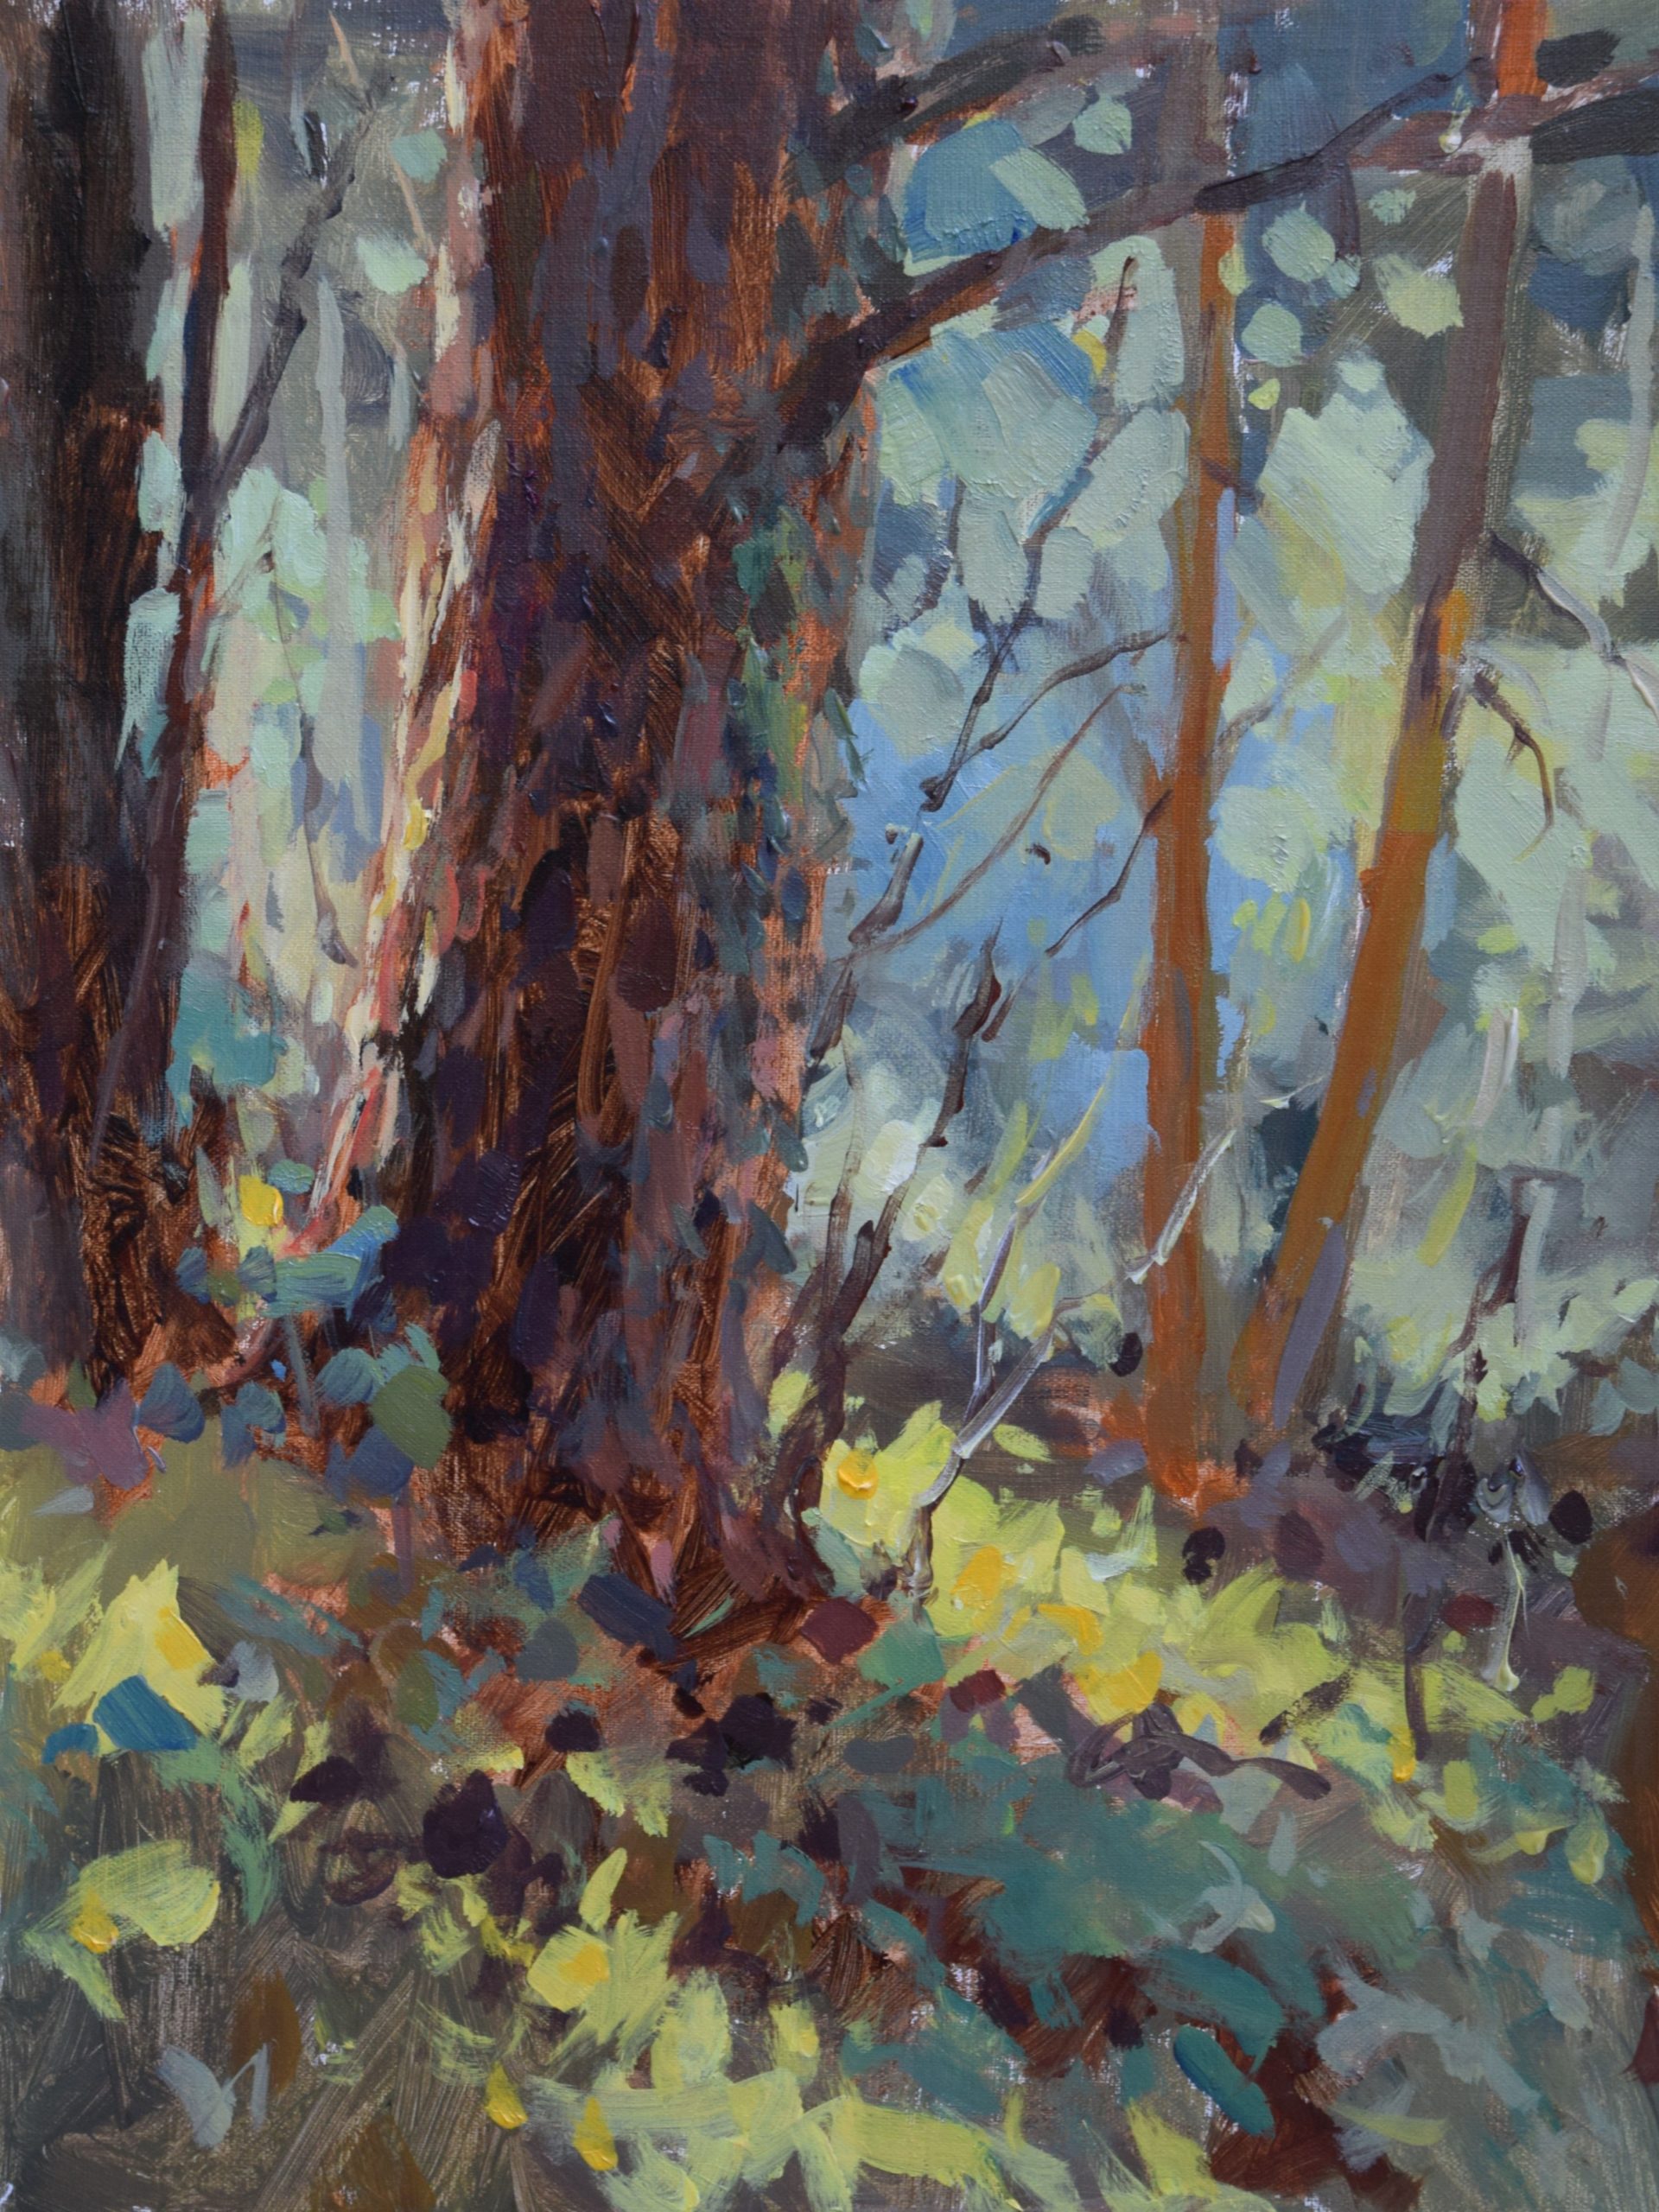 Jed Dorsey, "Of Sun & Shadows," 2019, acrylic, 18 x 24 in., Collection the artist, Plein air